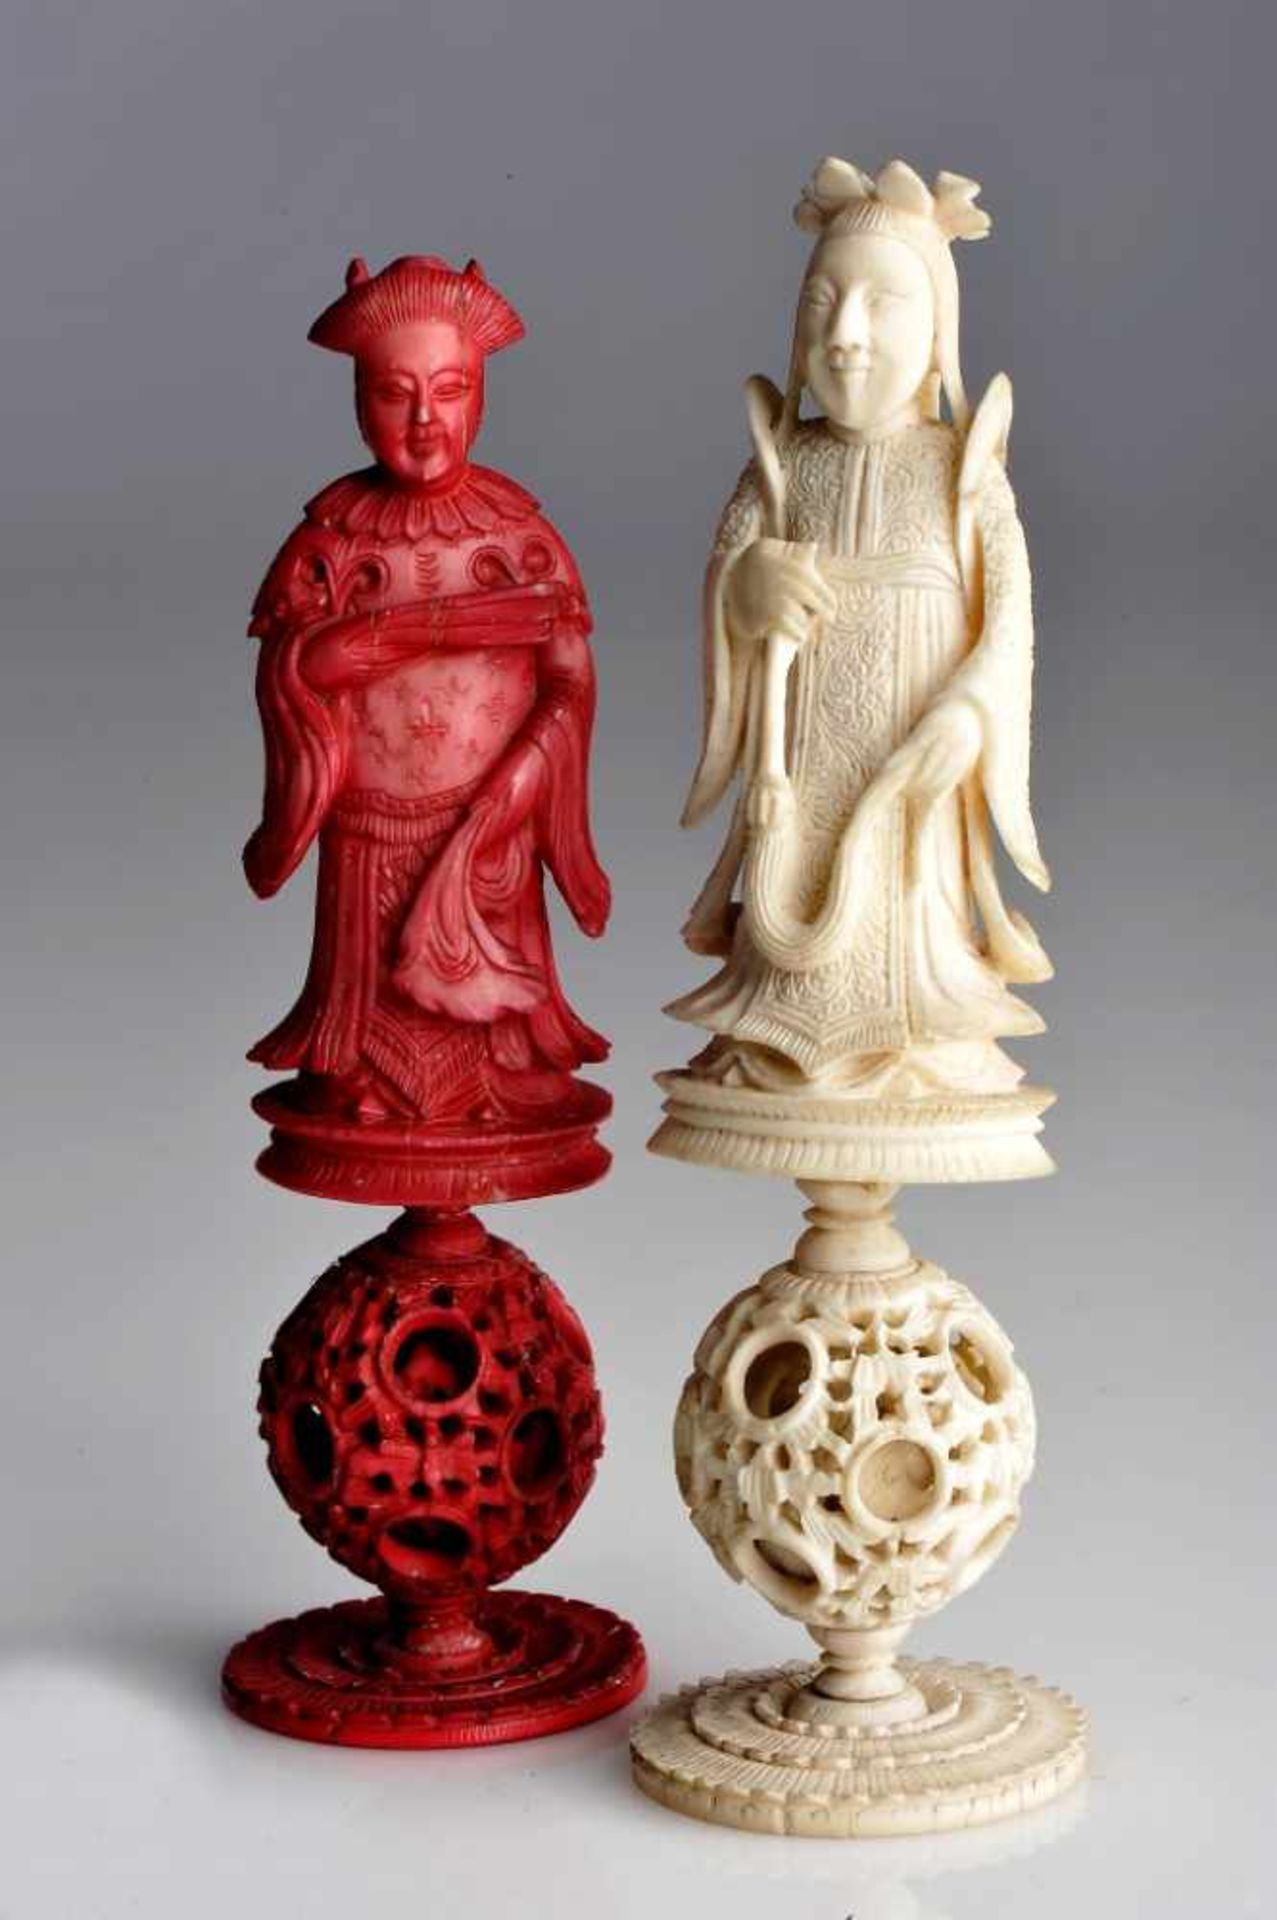 Chess PiecesChess Pieces, carved ivory with all the pieces based on "Ball of happiness", one of - Image 3 of 5